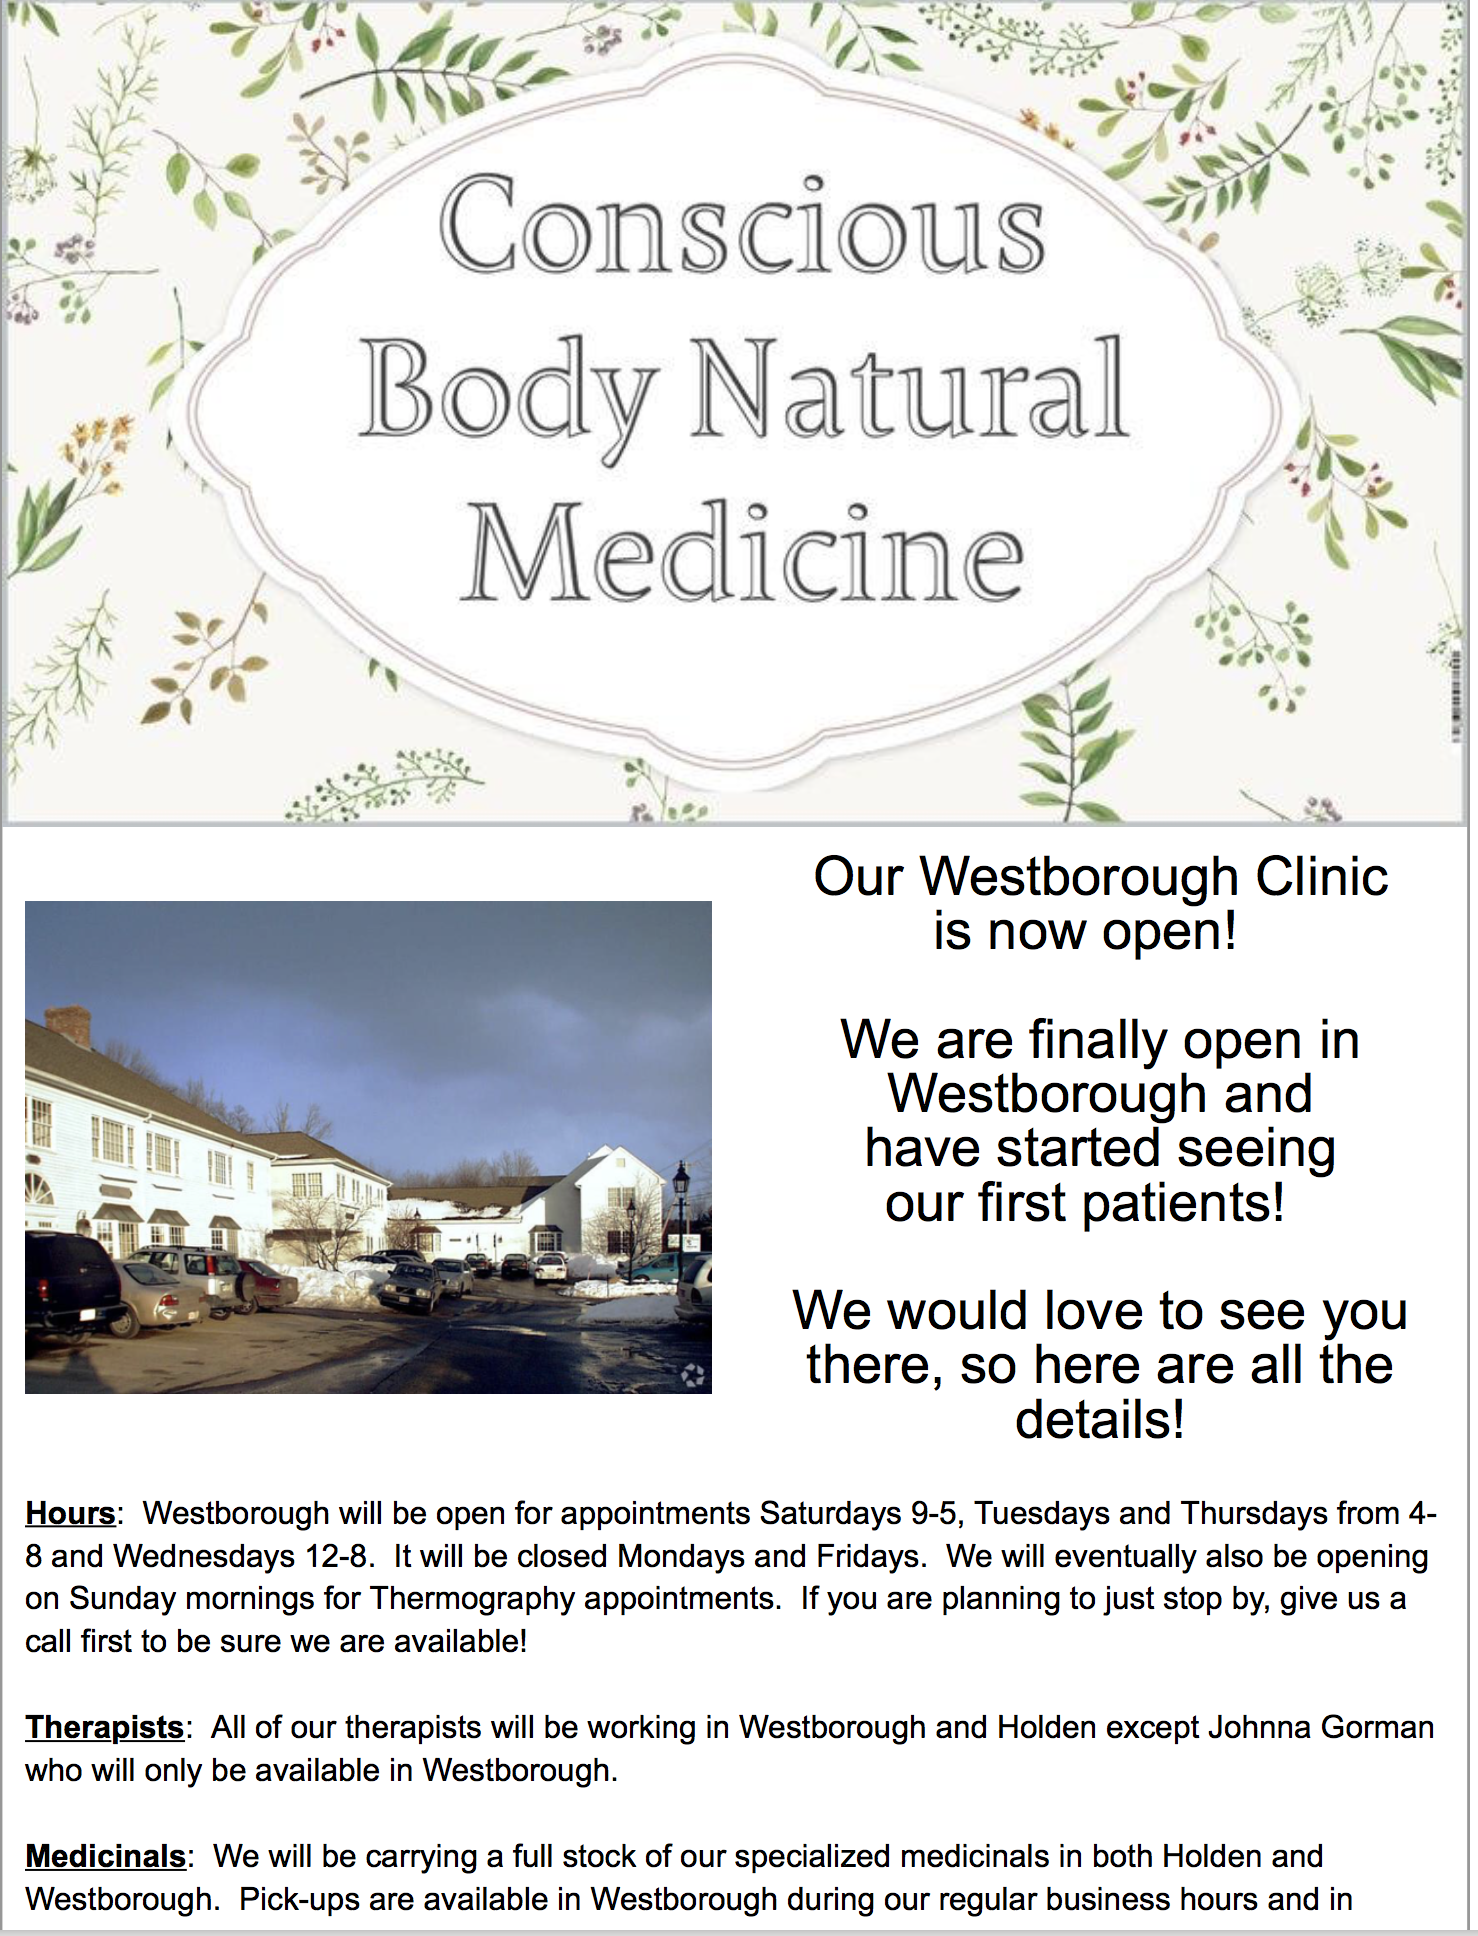 Our Westborough Clinic is Open January 2021